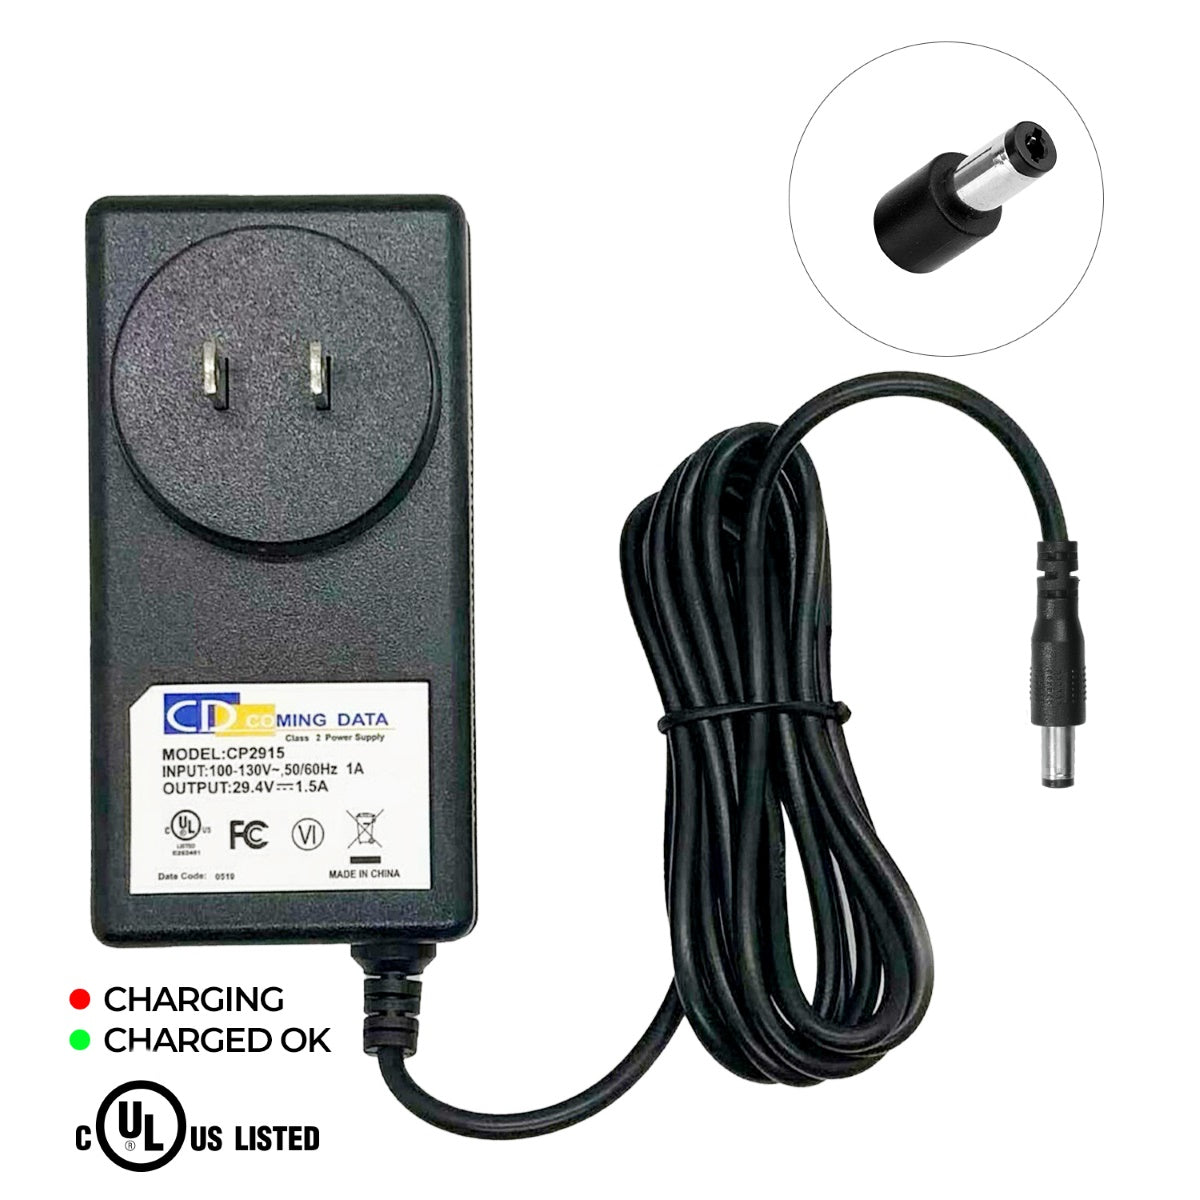 Charger for Mongoose M150 Electric Scooter